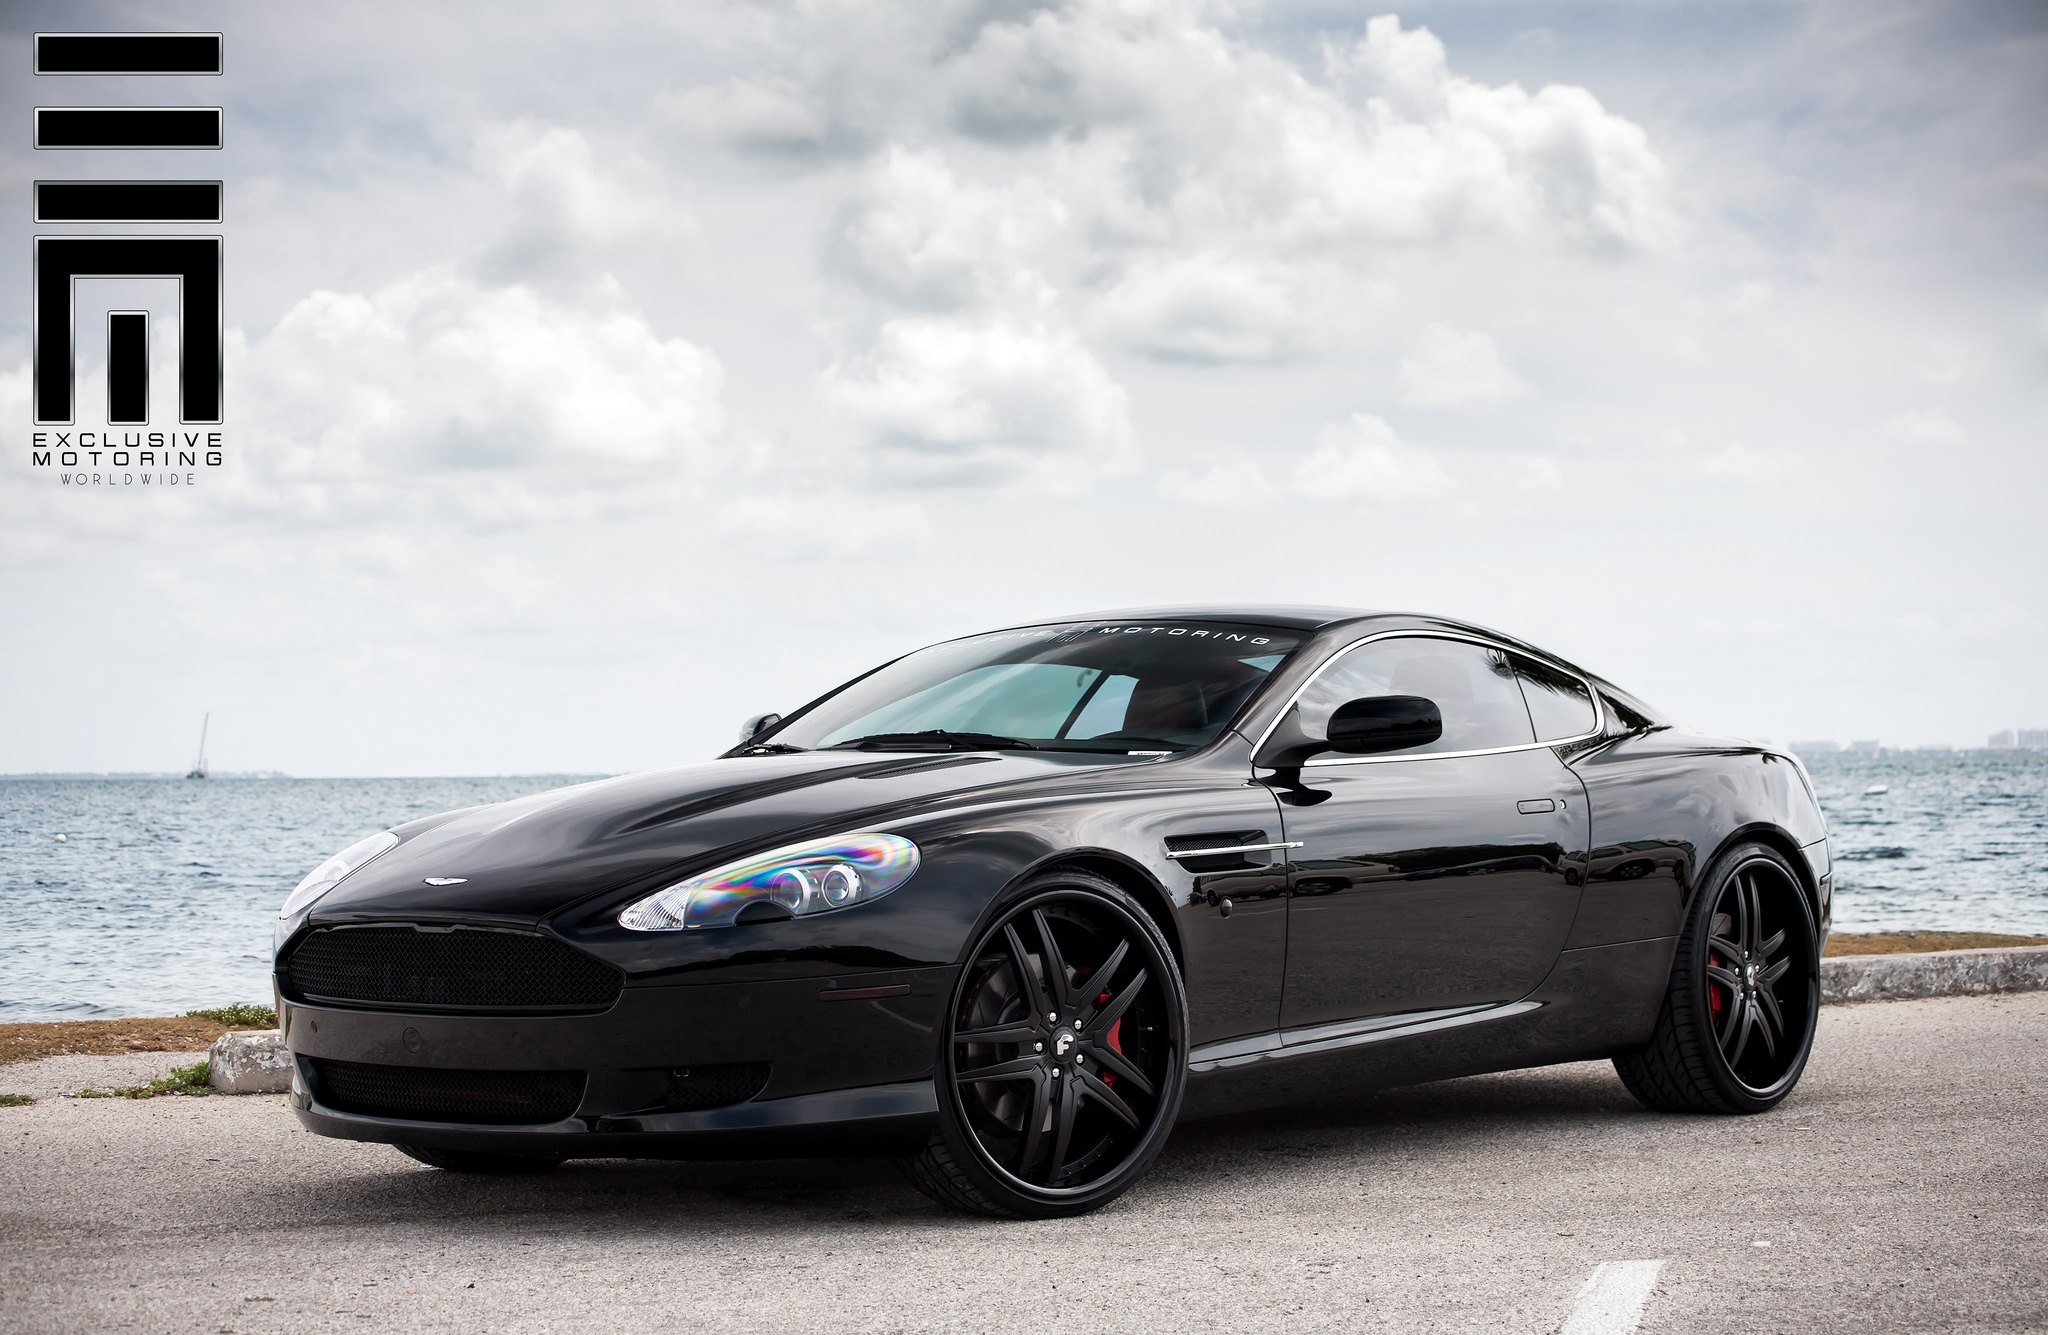 Black menacing Aston Martin DB9 on color matched custom wheels  - Photo by Exclusive Motoring